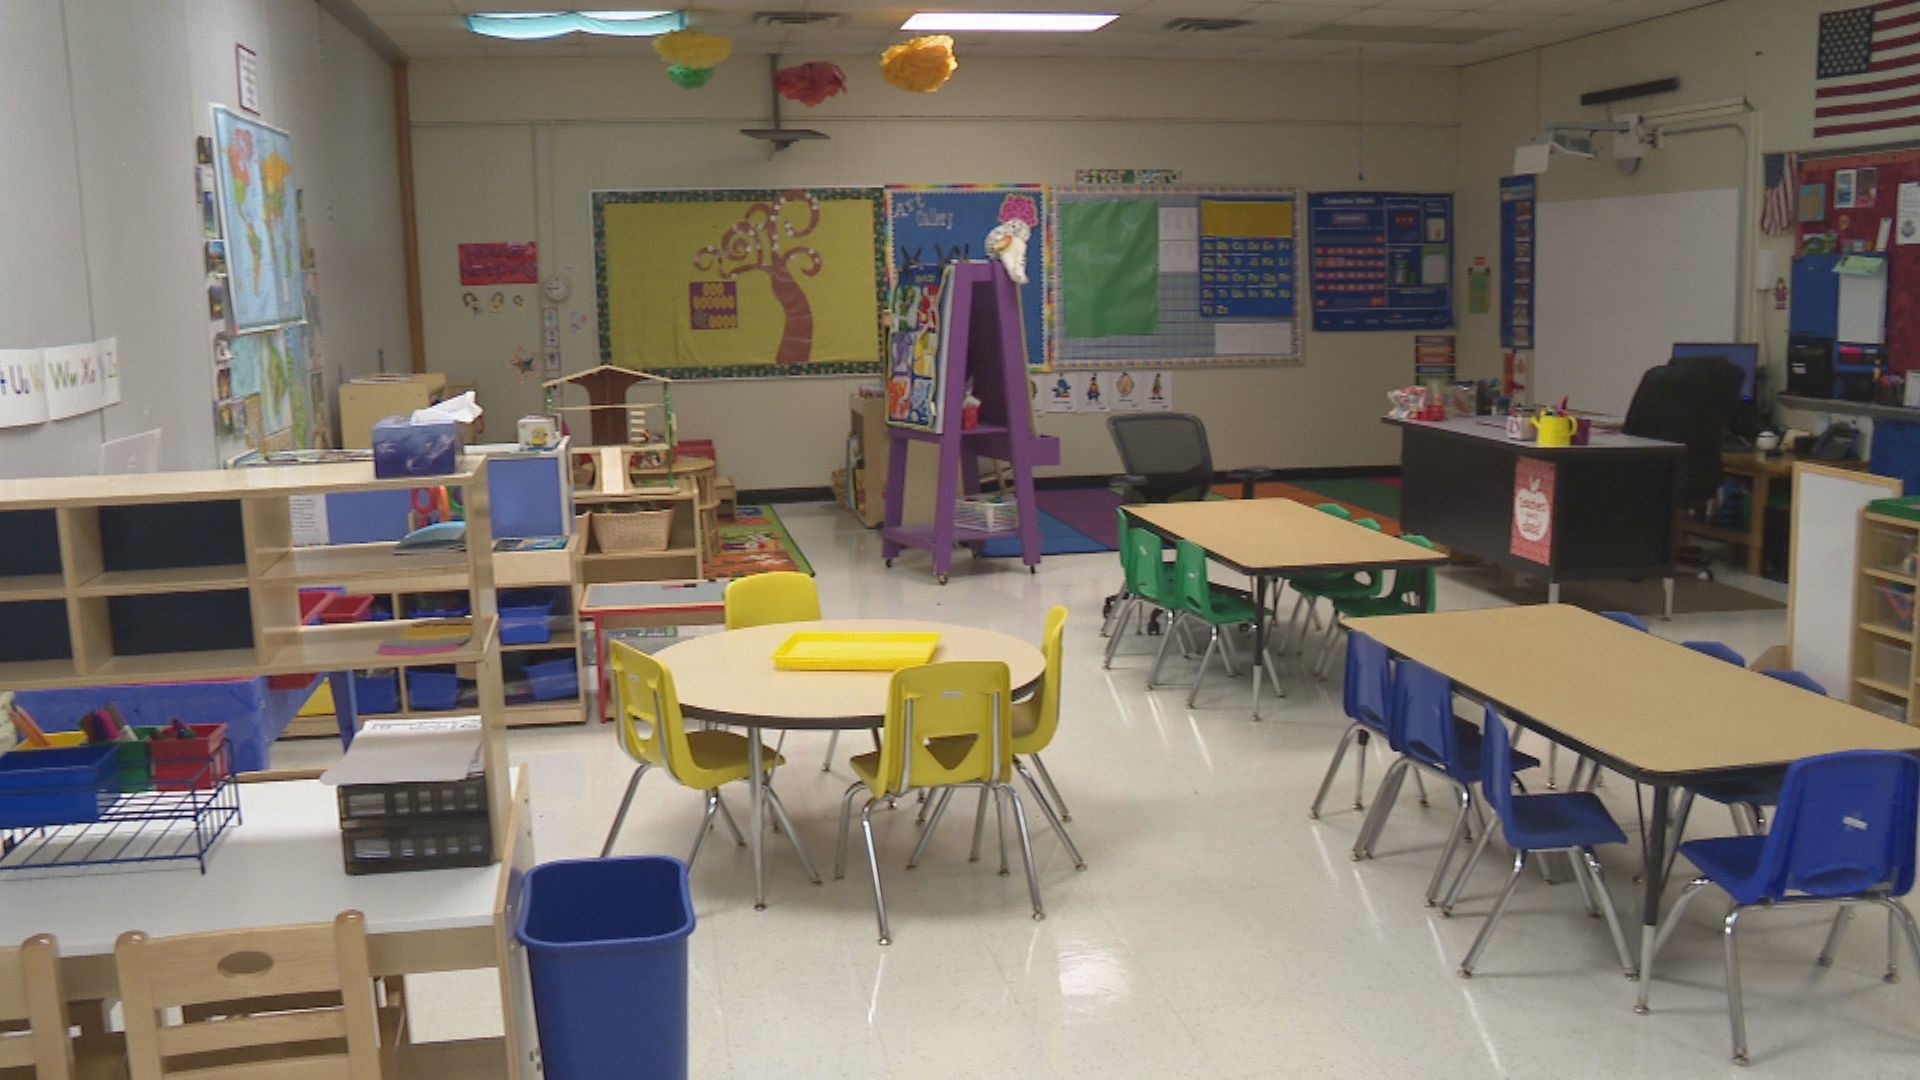 Ohio parents are waiting for more guidance from the state about opening schools in the fall. We got advice from an expert on how to cope with the uncertainties.